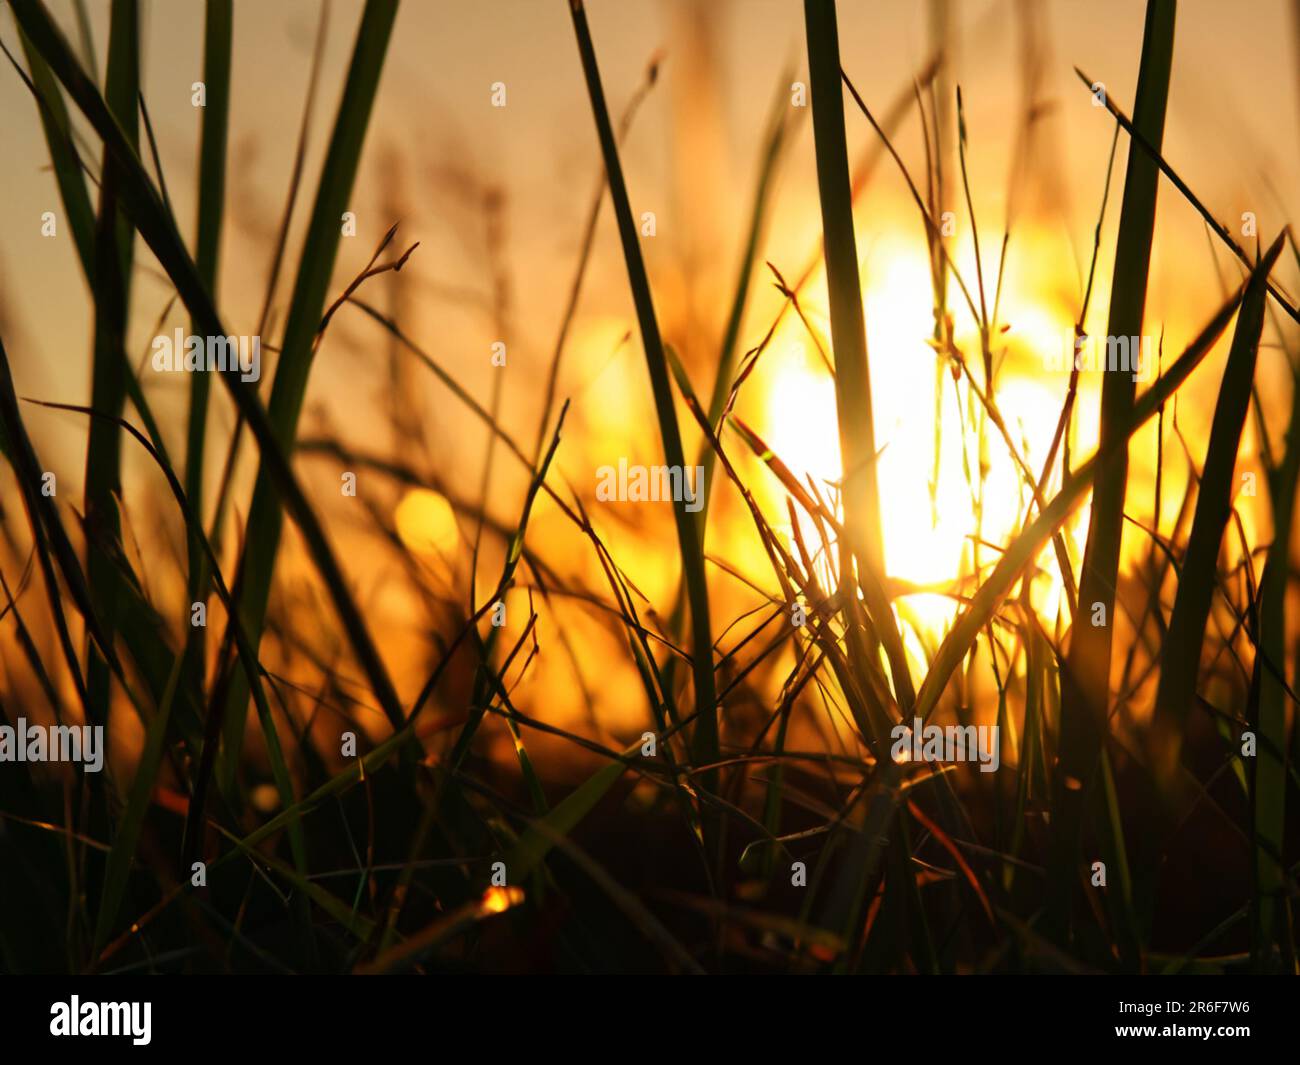 the sun is setting over the grass in a field of tall grass. . Stock Photo